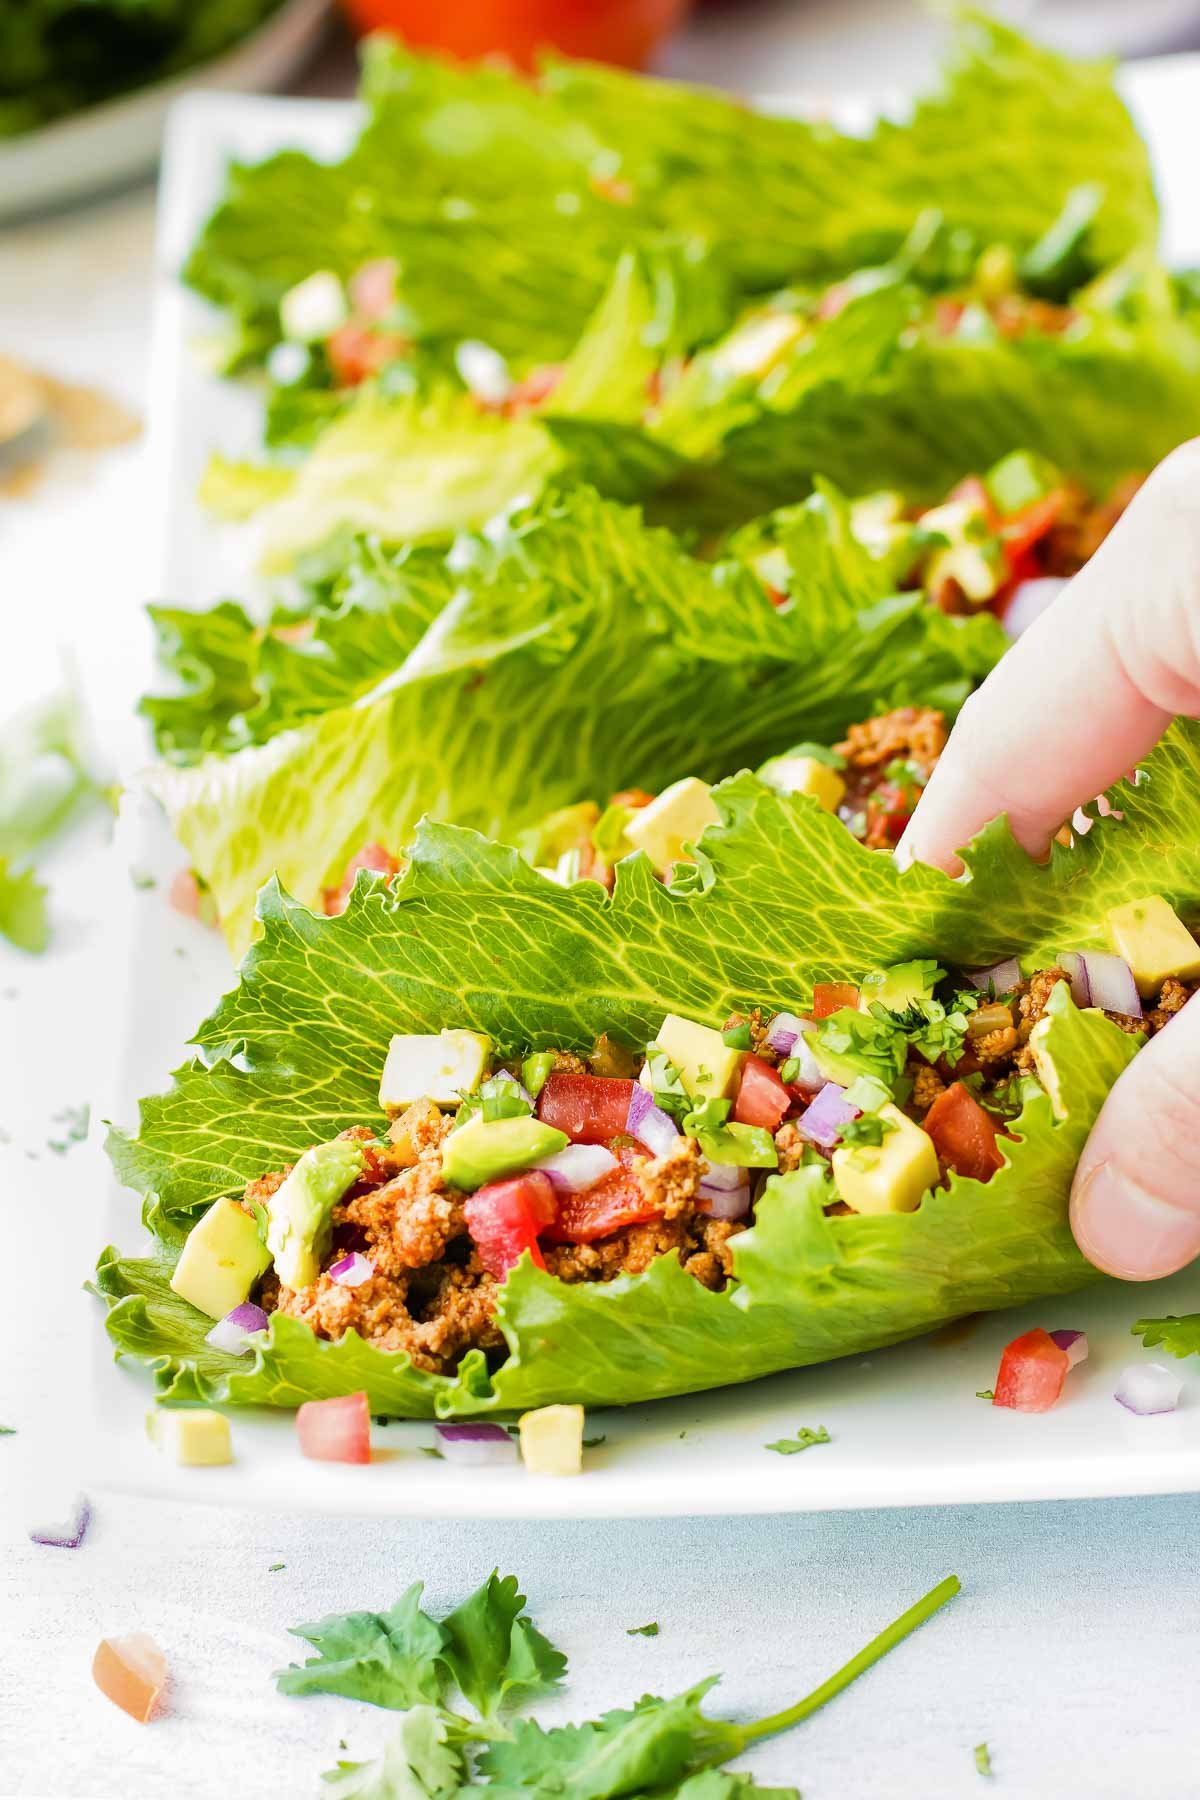 A hand picking up turkey taco lettuce wraps on a white plate.